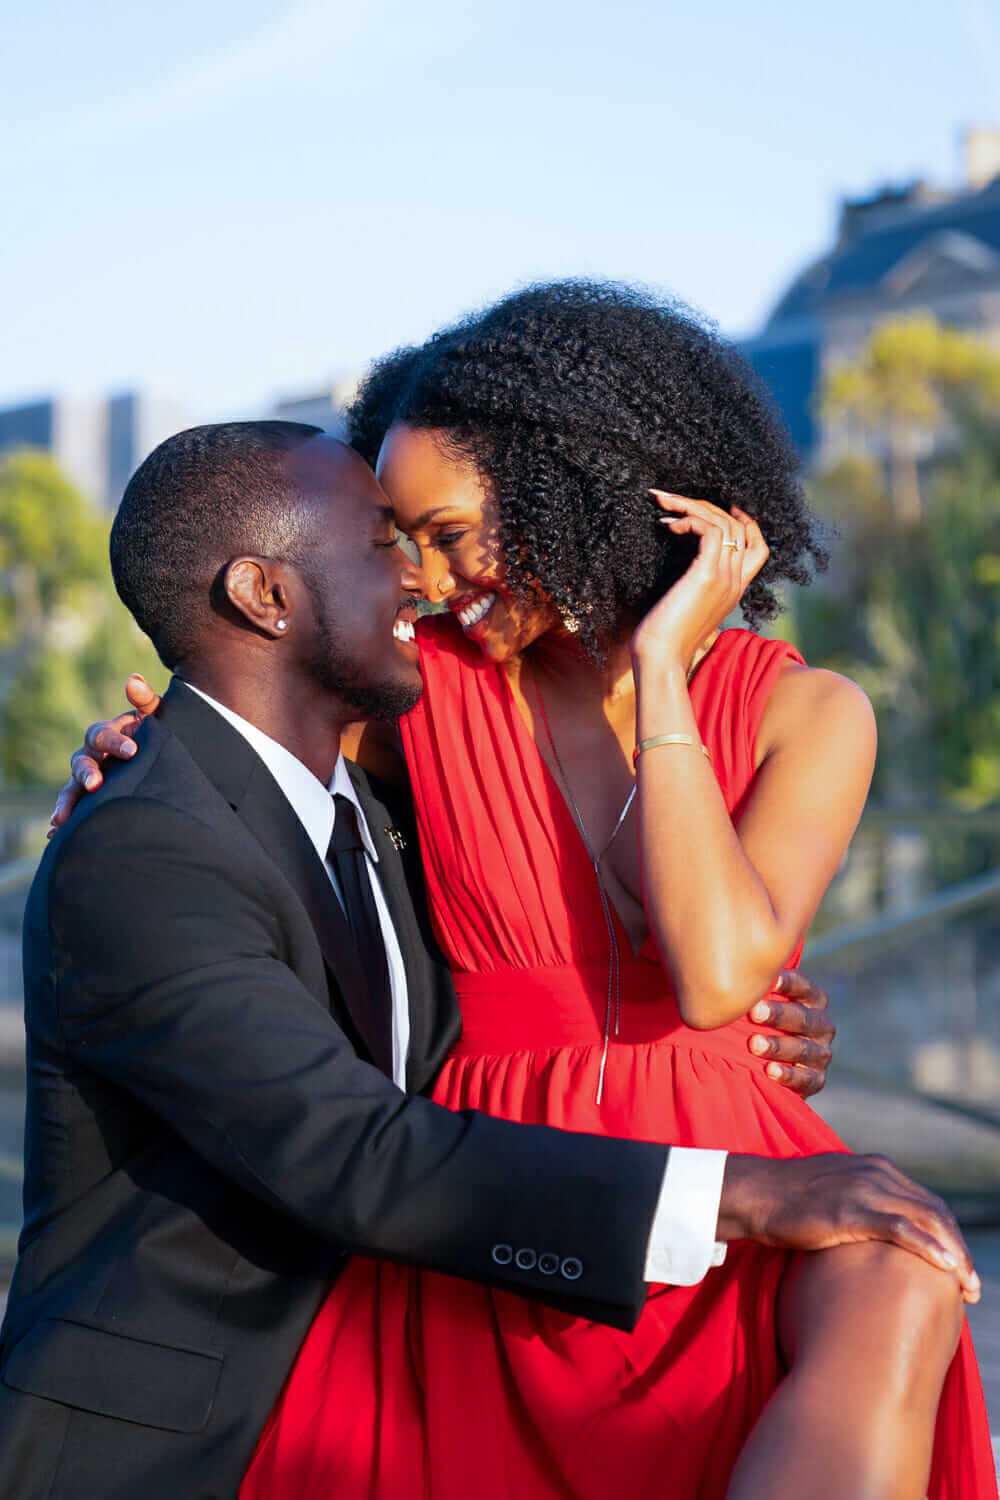 70 Engagement Photo Ideas from Real Couples